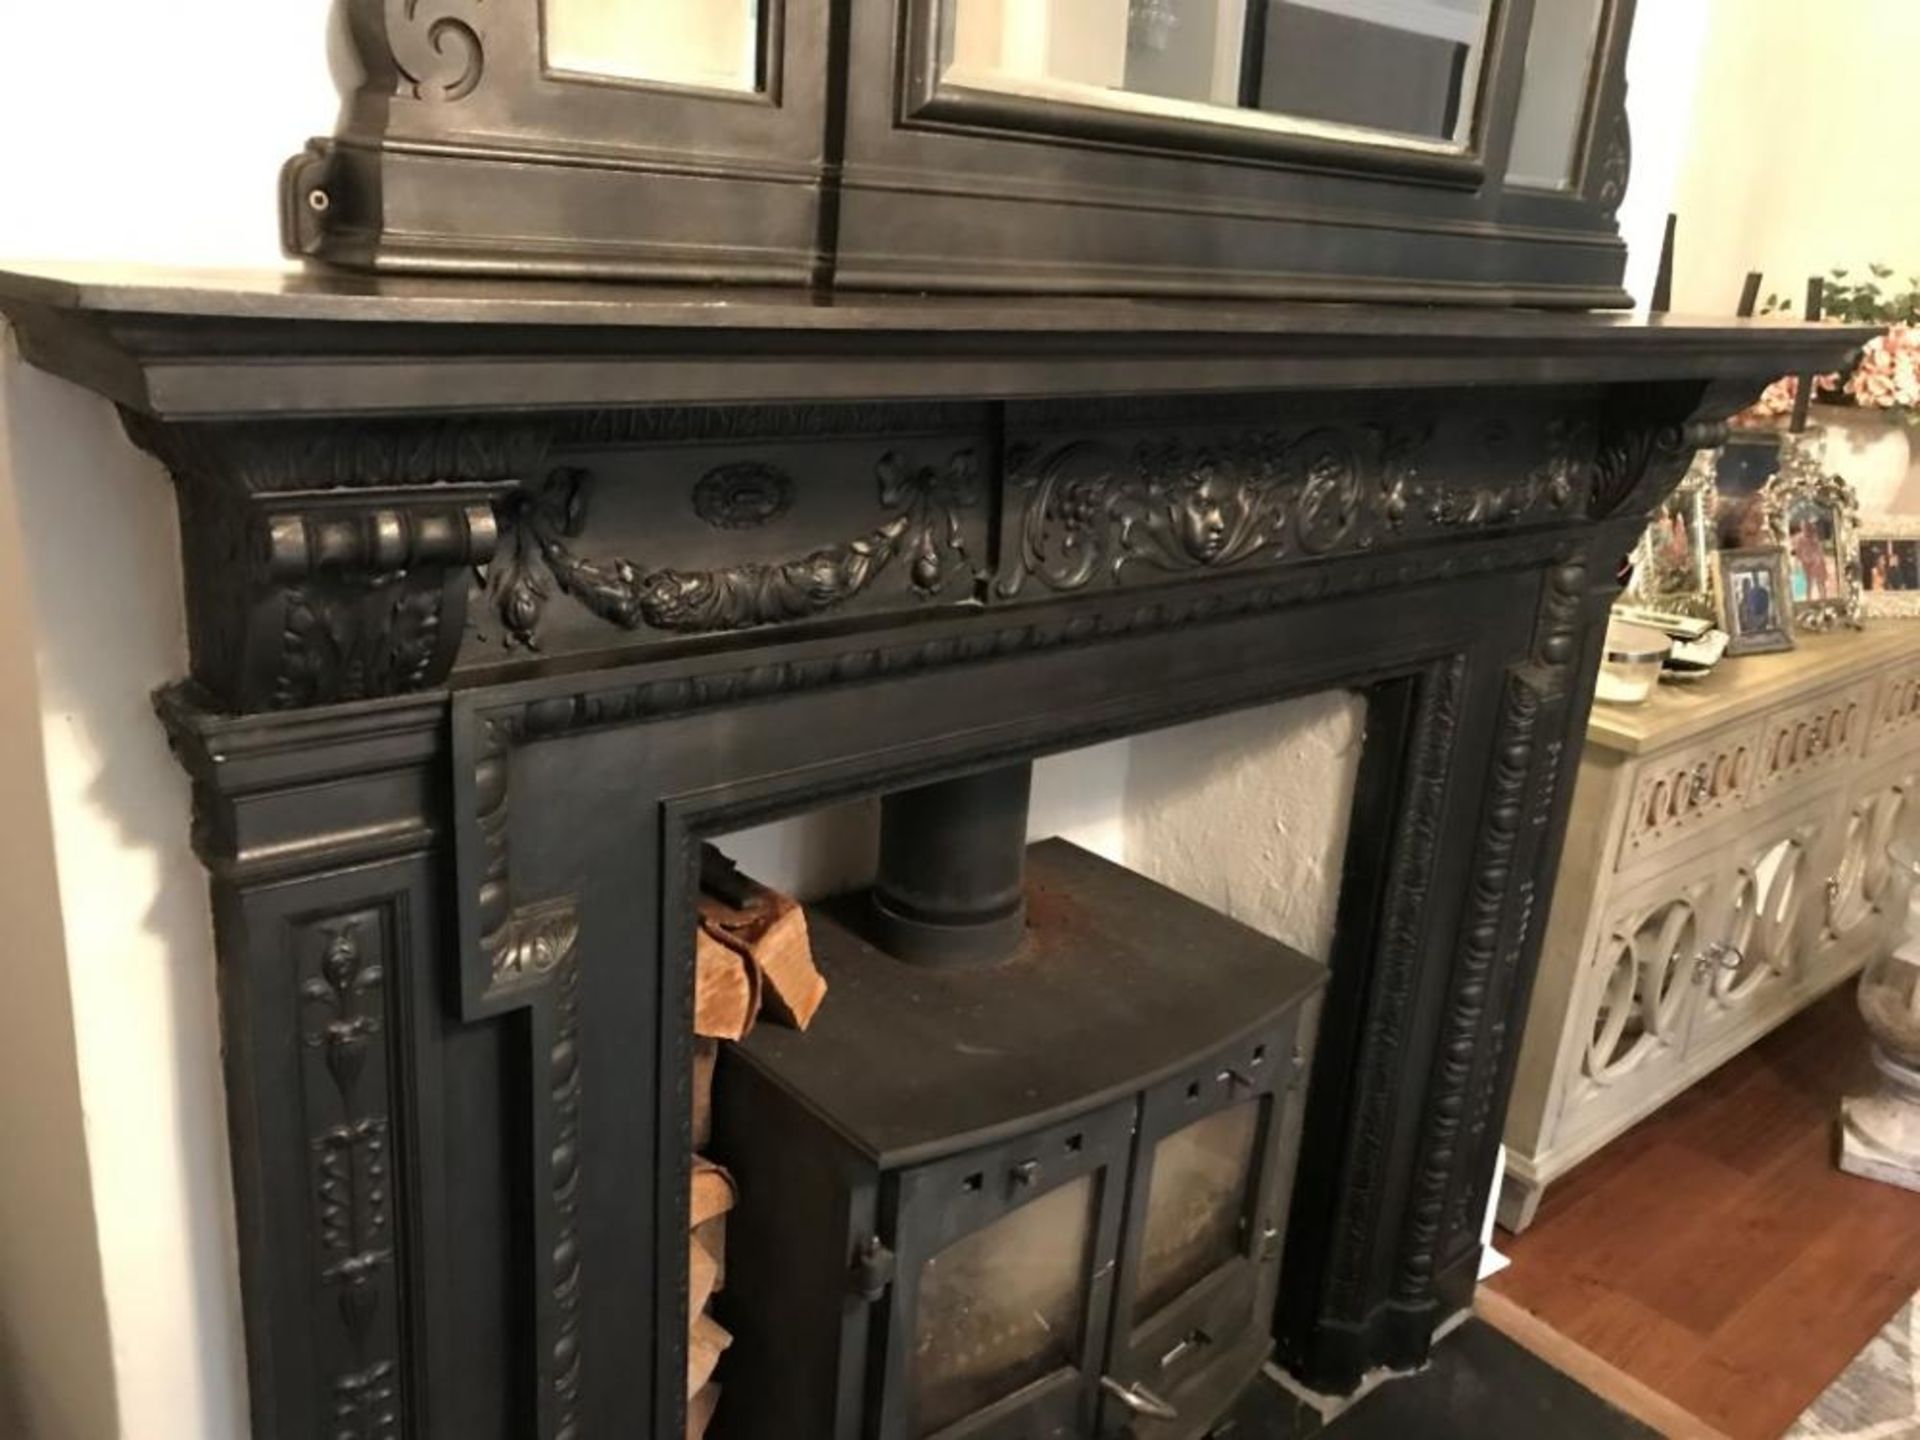 1 x Ultra Rare Stunningly Ornate Antique Victorian Cast Iron Fireplace, With Matching Cast Iron Mirr - Image 7 of 23